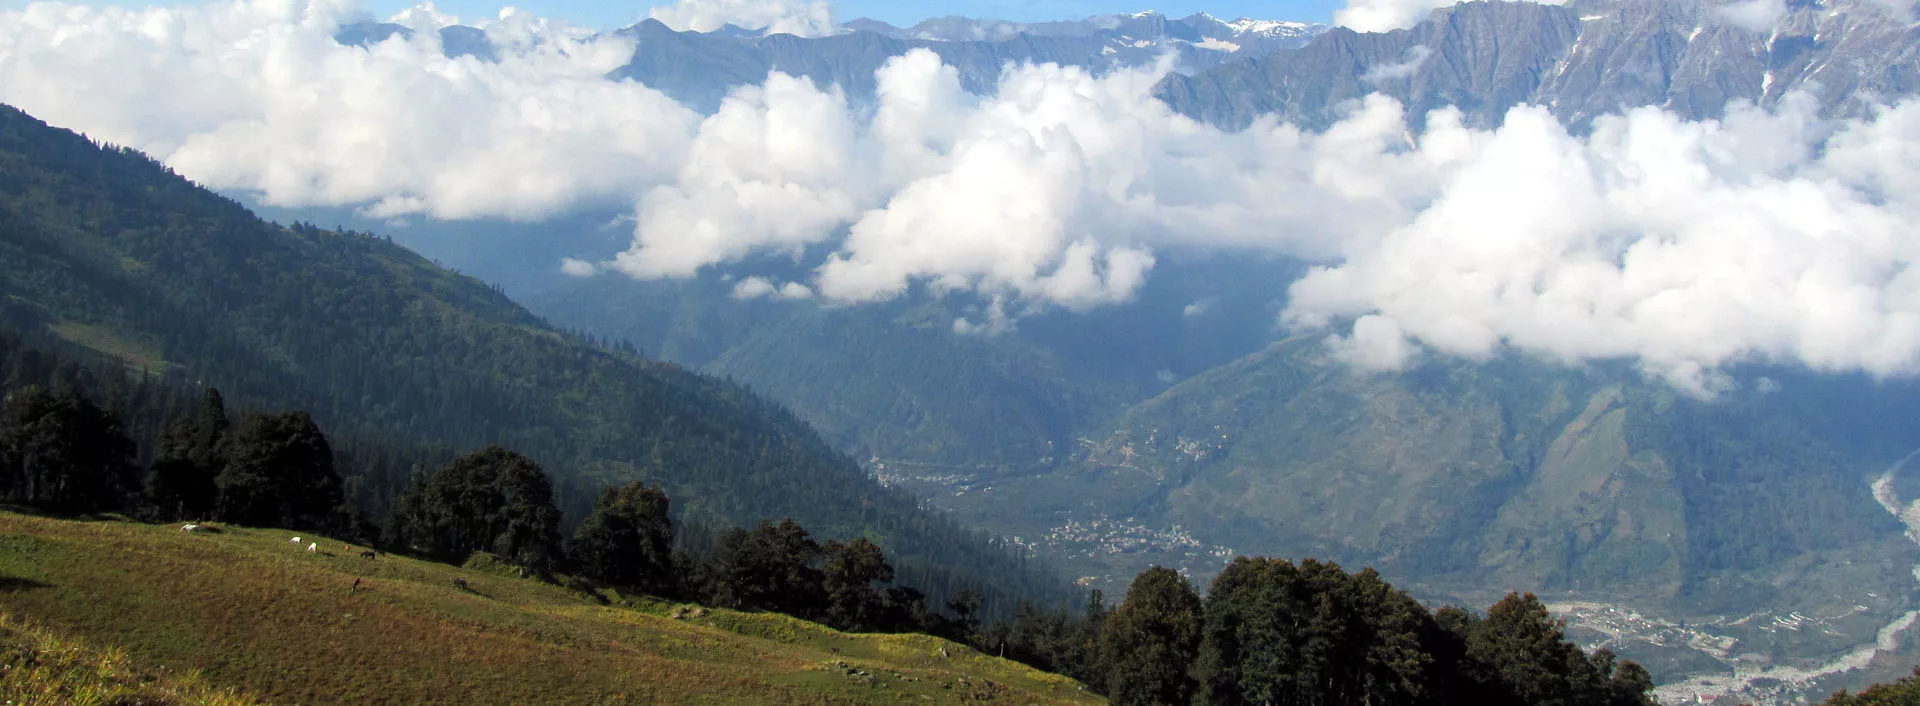 View of Manali Valley with Cumulus Clouds from Bhrigu Lake Trek